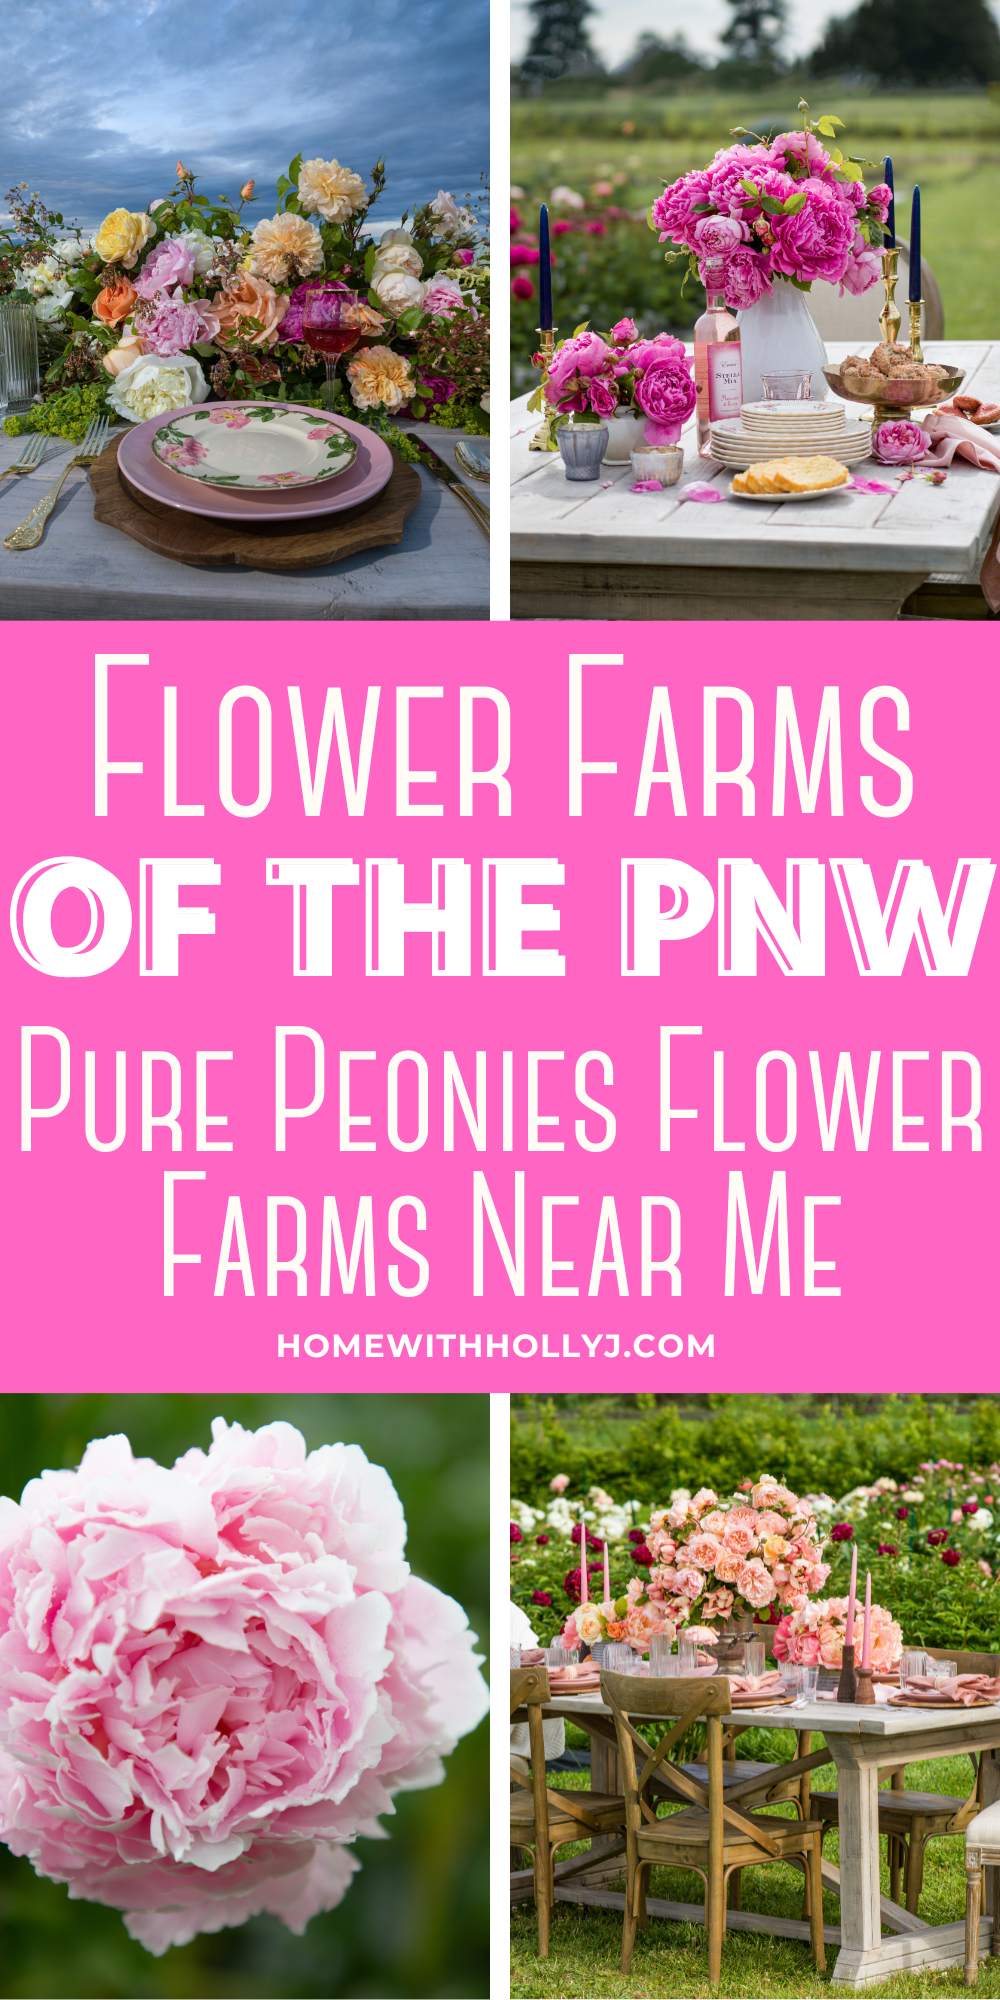 Explore Pure Peonies Flower Farms near me in the PNW! Immerse yourself in a blooming paradise and discover vibrant peonies. Read more here.